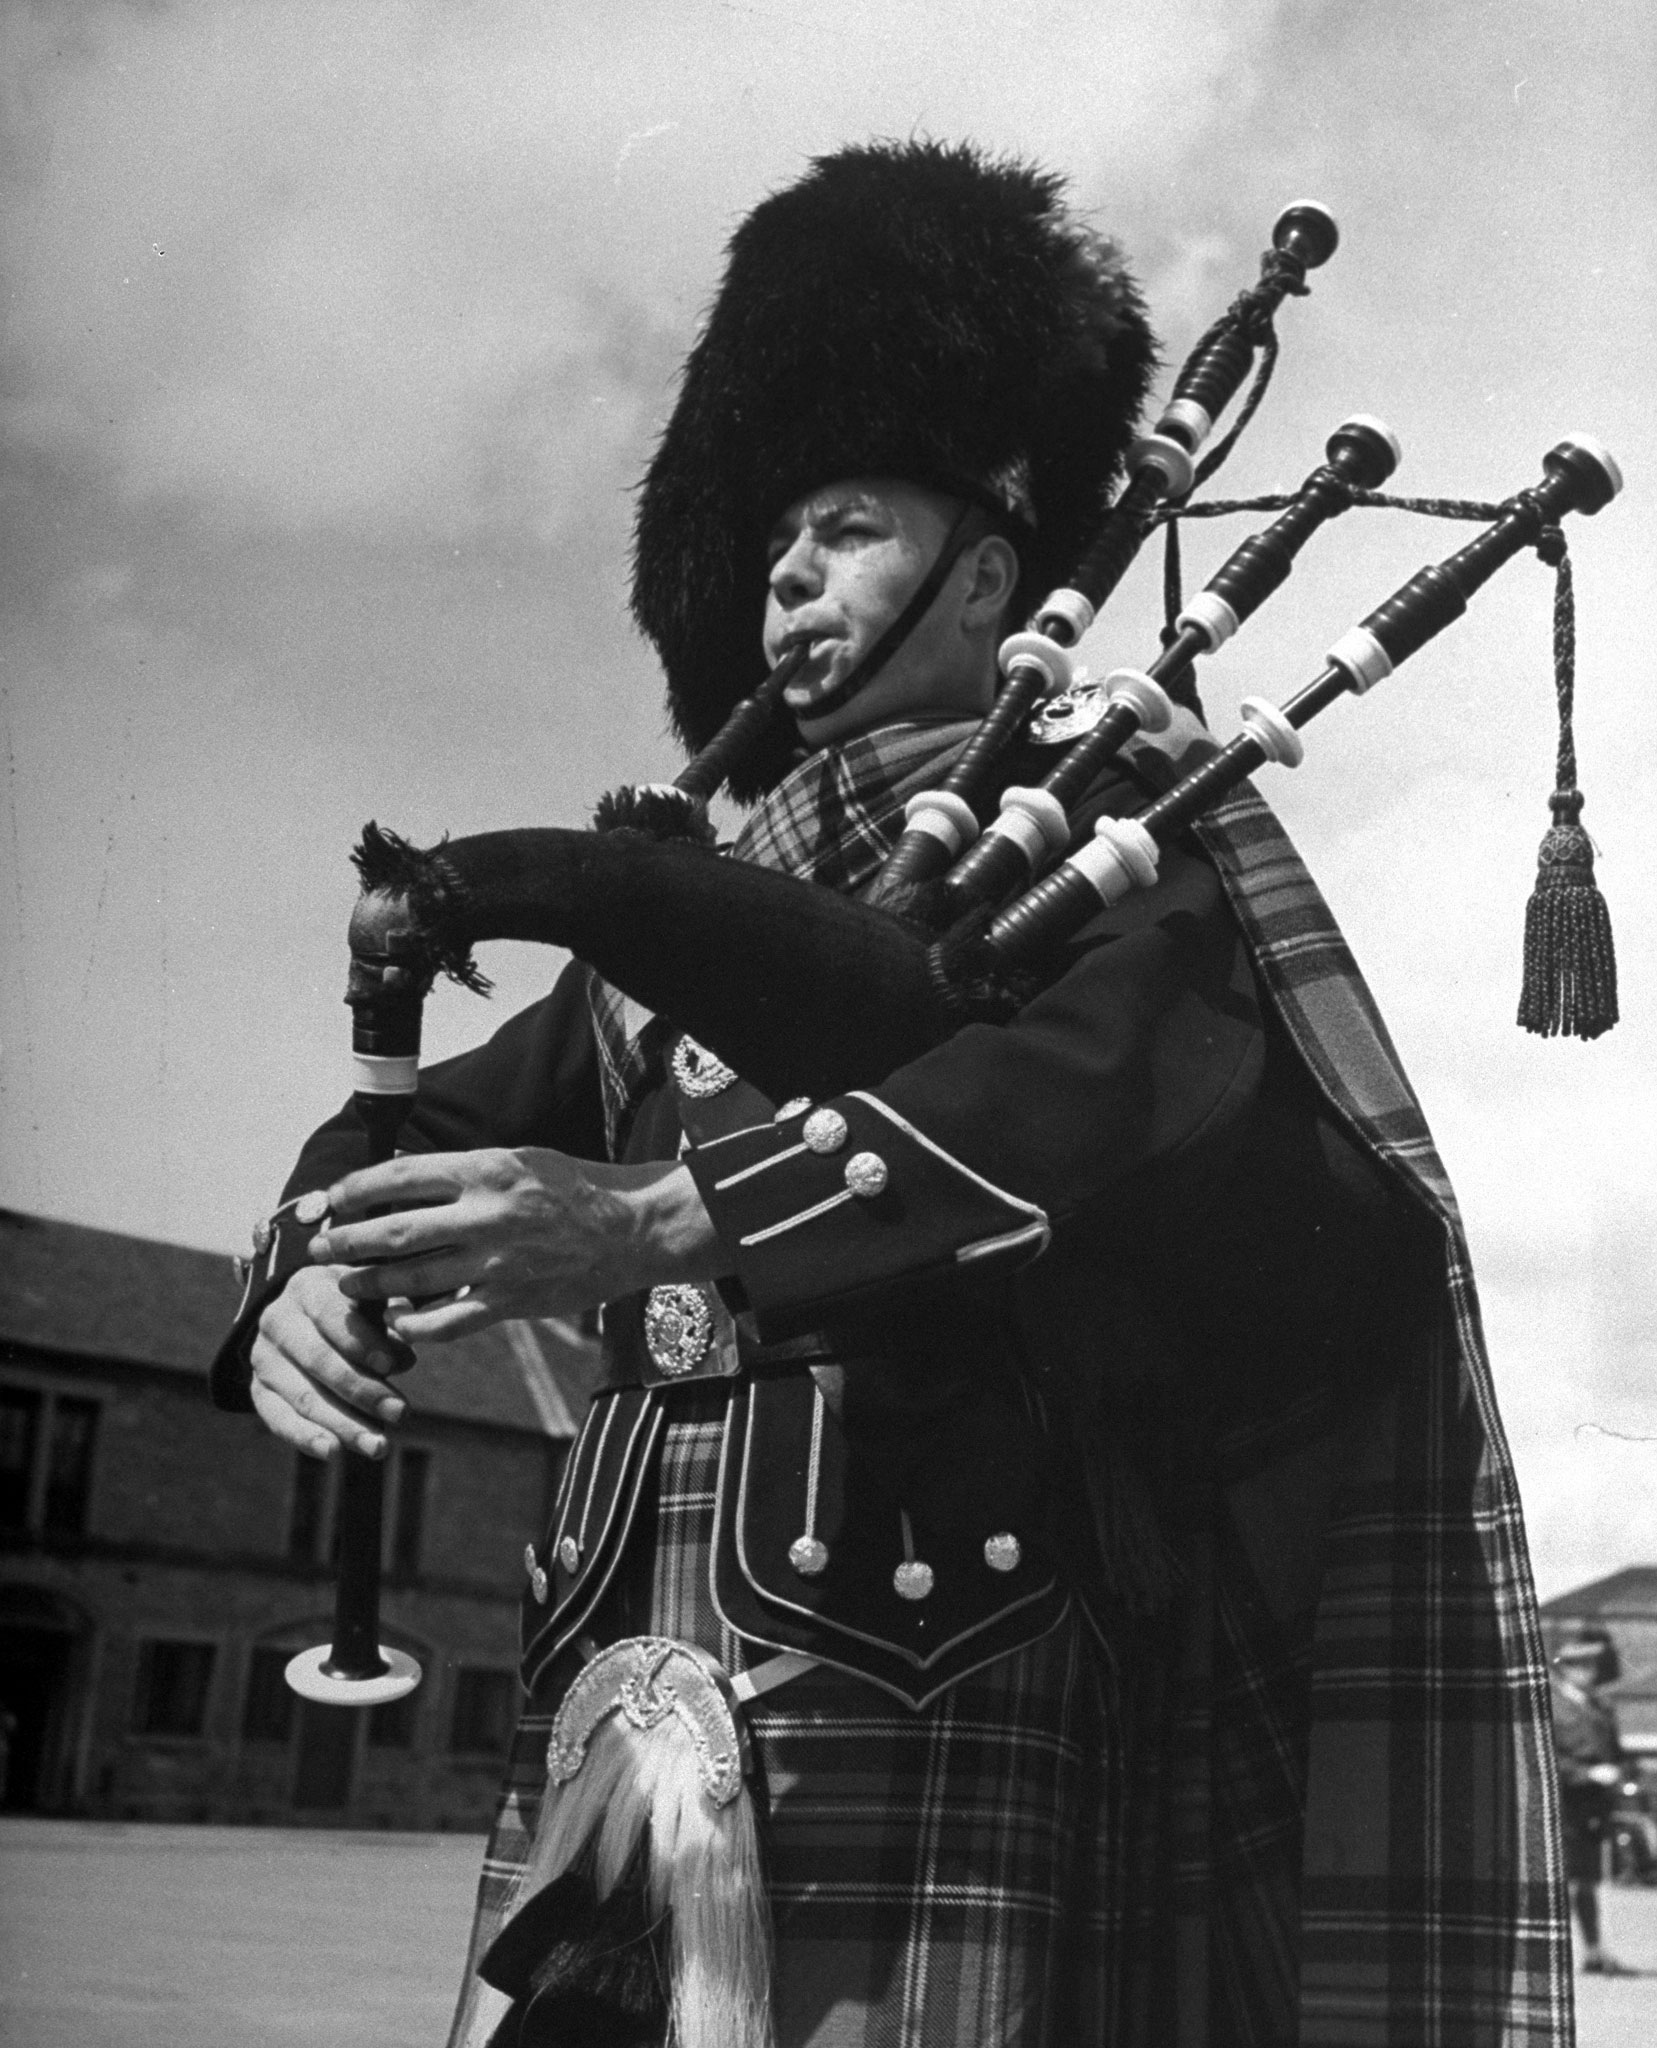 In full dress a piper of the famed Black Watch regiment pipes a pibroch at Perth Barracks.